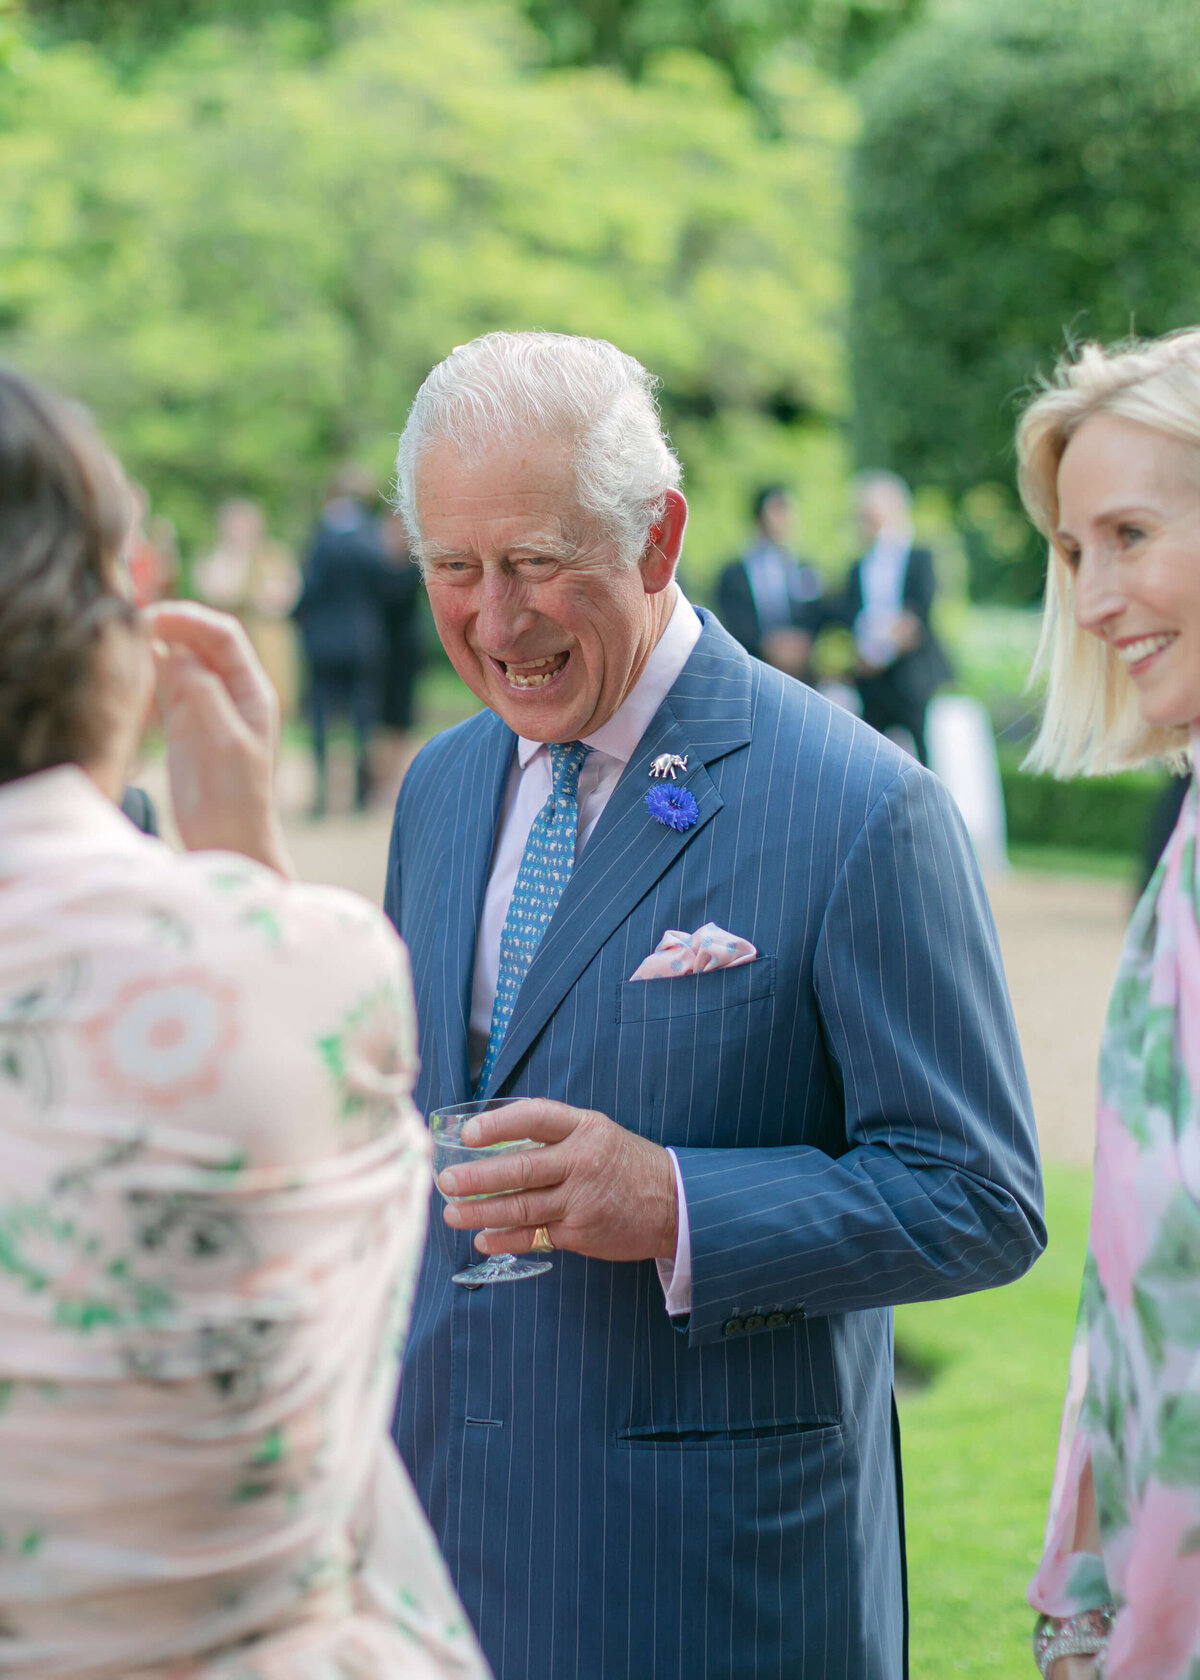 chloe-winstanley-events-clarence-house-prince-charles-laughing